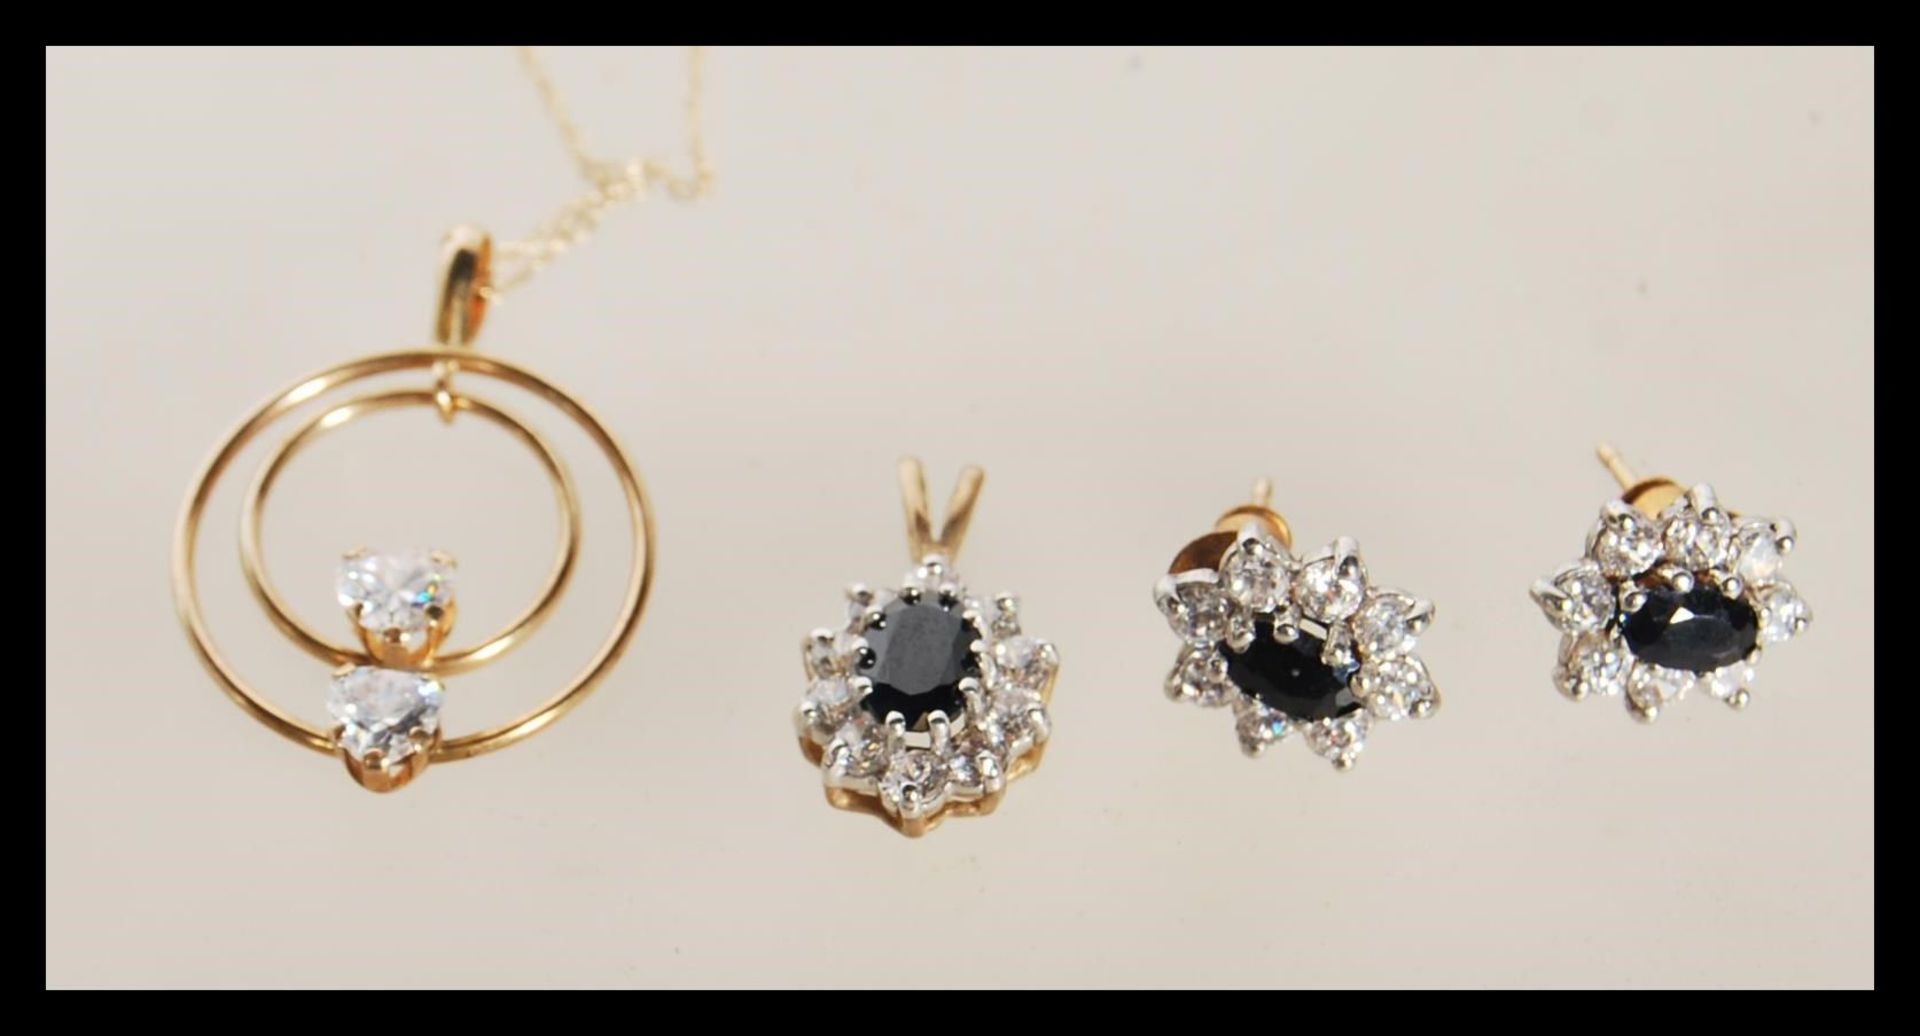 A selection of stamped 9ct gold jewellery to include a pendant necklace having a circular pendant